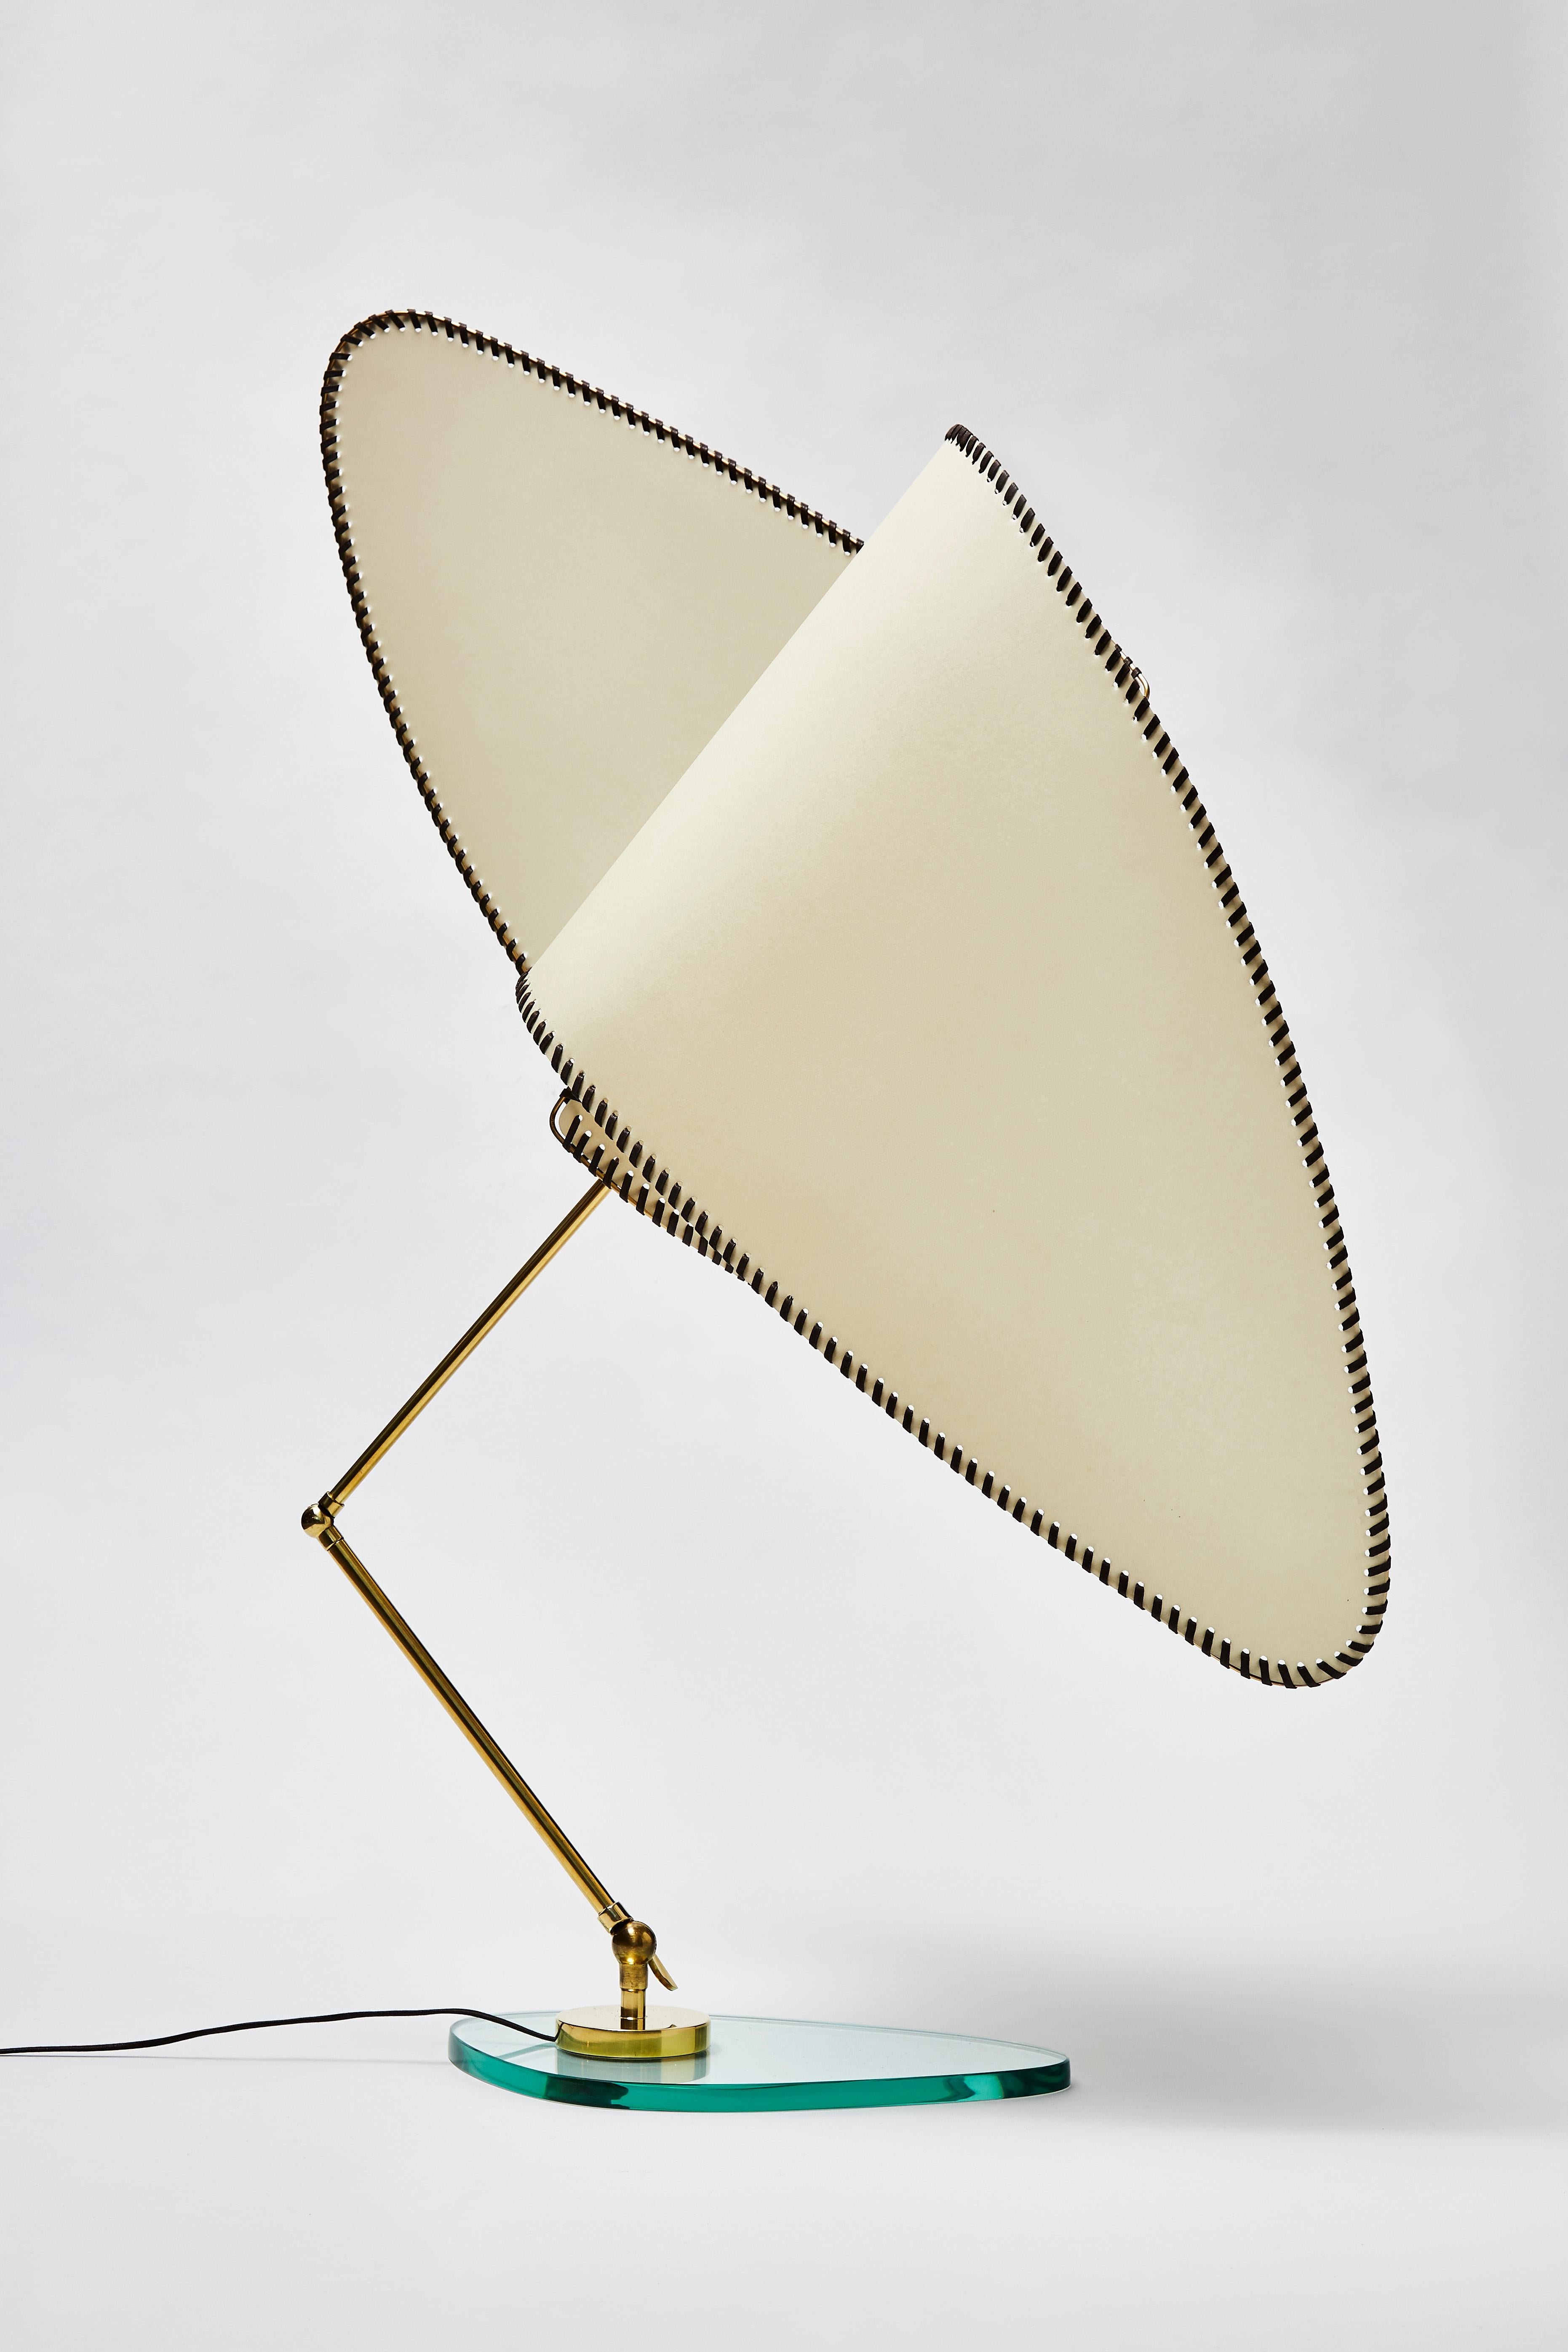 Ventola table lamp by the artist Diego Mardegan exclusively for Glustin Luminaires.

Beautiful two ways shade made of a brass structure, parchemin paper and waxed fabric hold by an articulated brass arm attached to a free from glass foot.